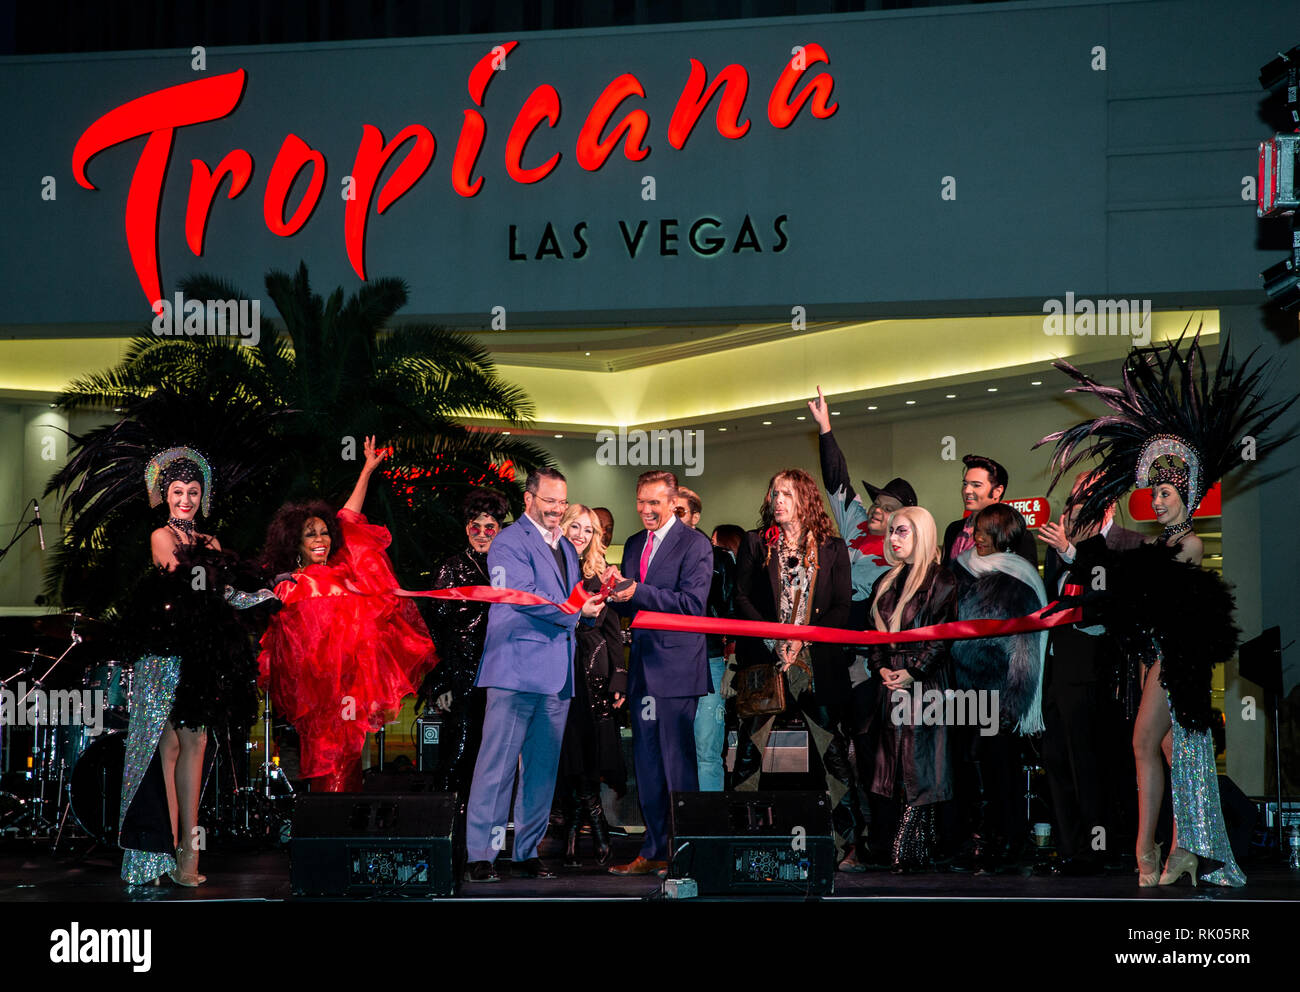 Las Vegas, NV, USA. 7th Feb, 2019. ***HOUSE COVERAGE*** Aaron Rosenthal, VP and General Manager for Tropicana Las Vegas, The past and current cast of Legends and Brian Brigner, Chief Operating Officer of On Stage Enterprises, Producers of Legends pictured at The Legends in Concert welcoming event and outdoor preview at Tropicana Las Vegas in Las Vegas, NV on February 7, 2019. Credit: Erik Kabik Photography/Media Punch/Alamy Live News Stock Photo